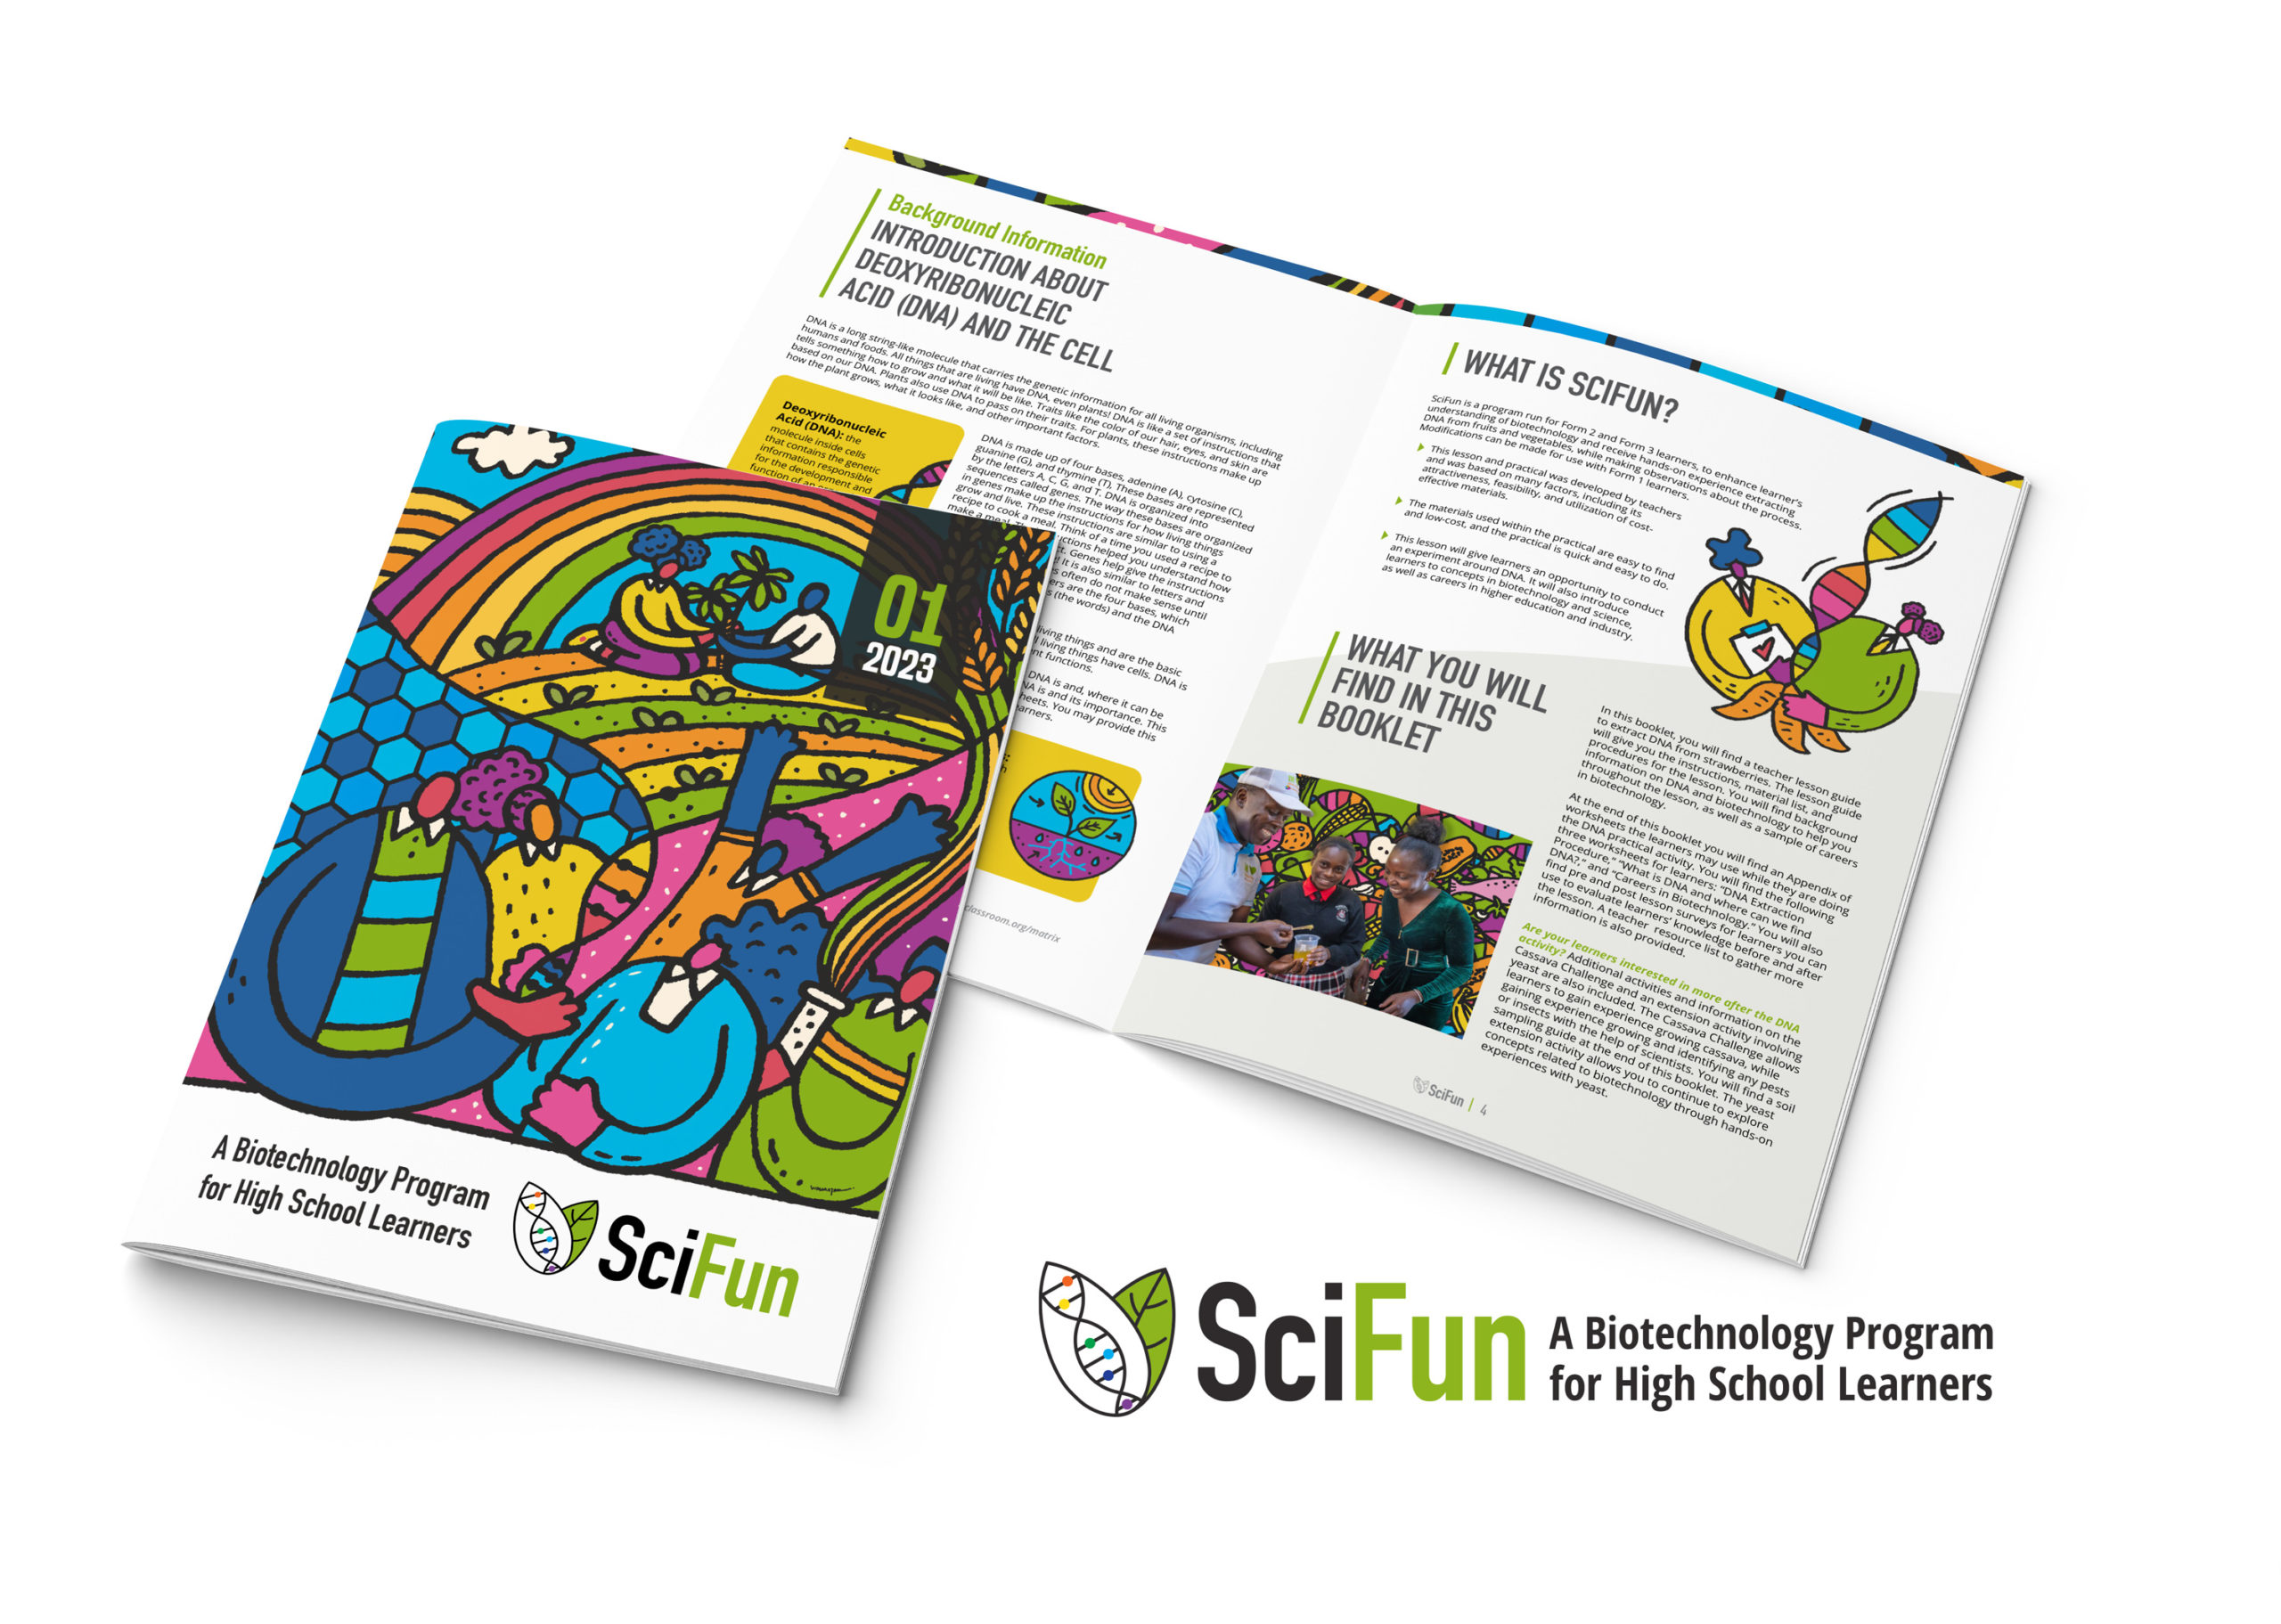 A picture of two SciFun books, one open and one closed.